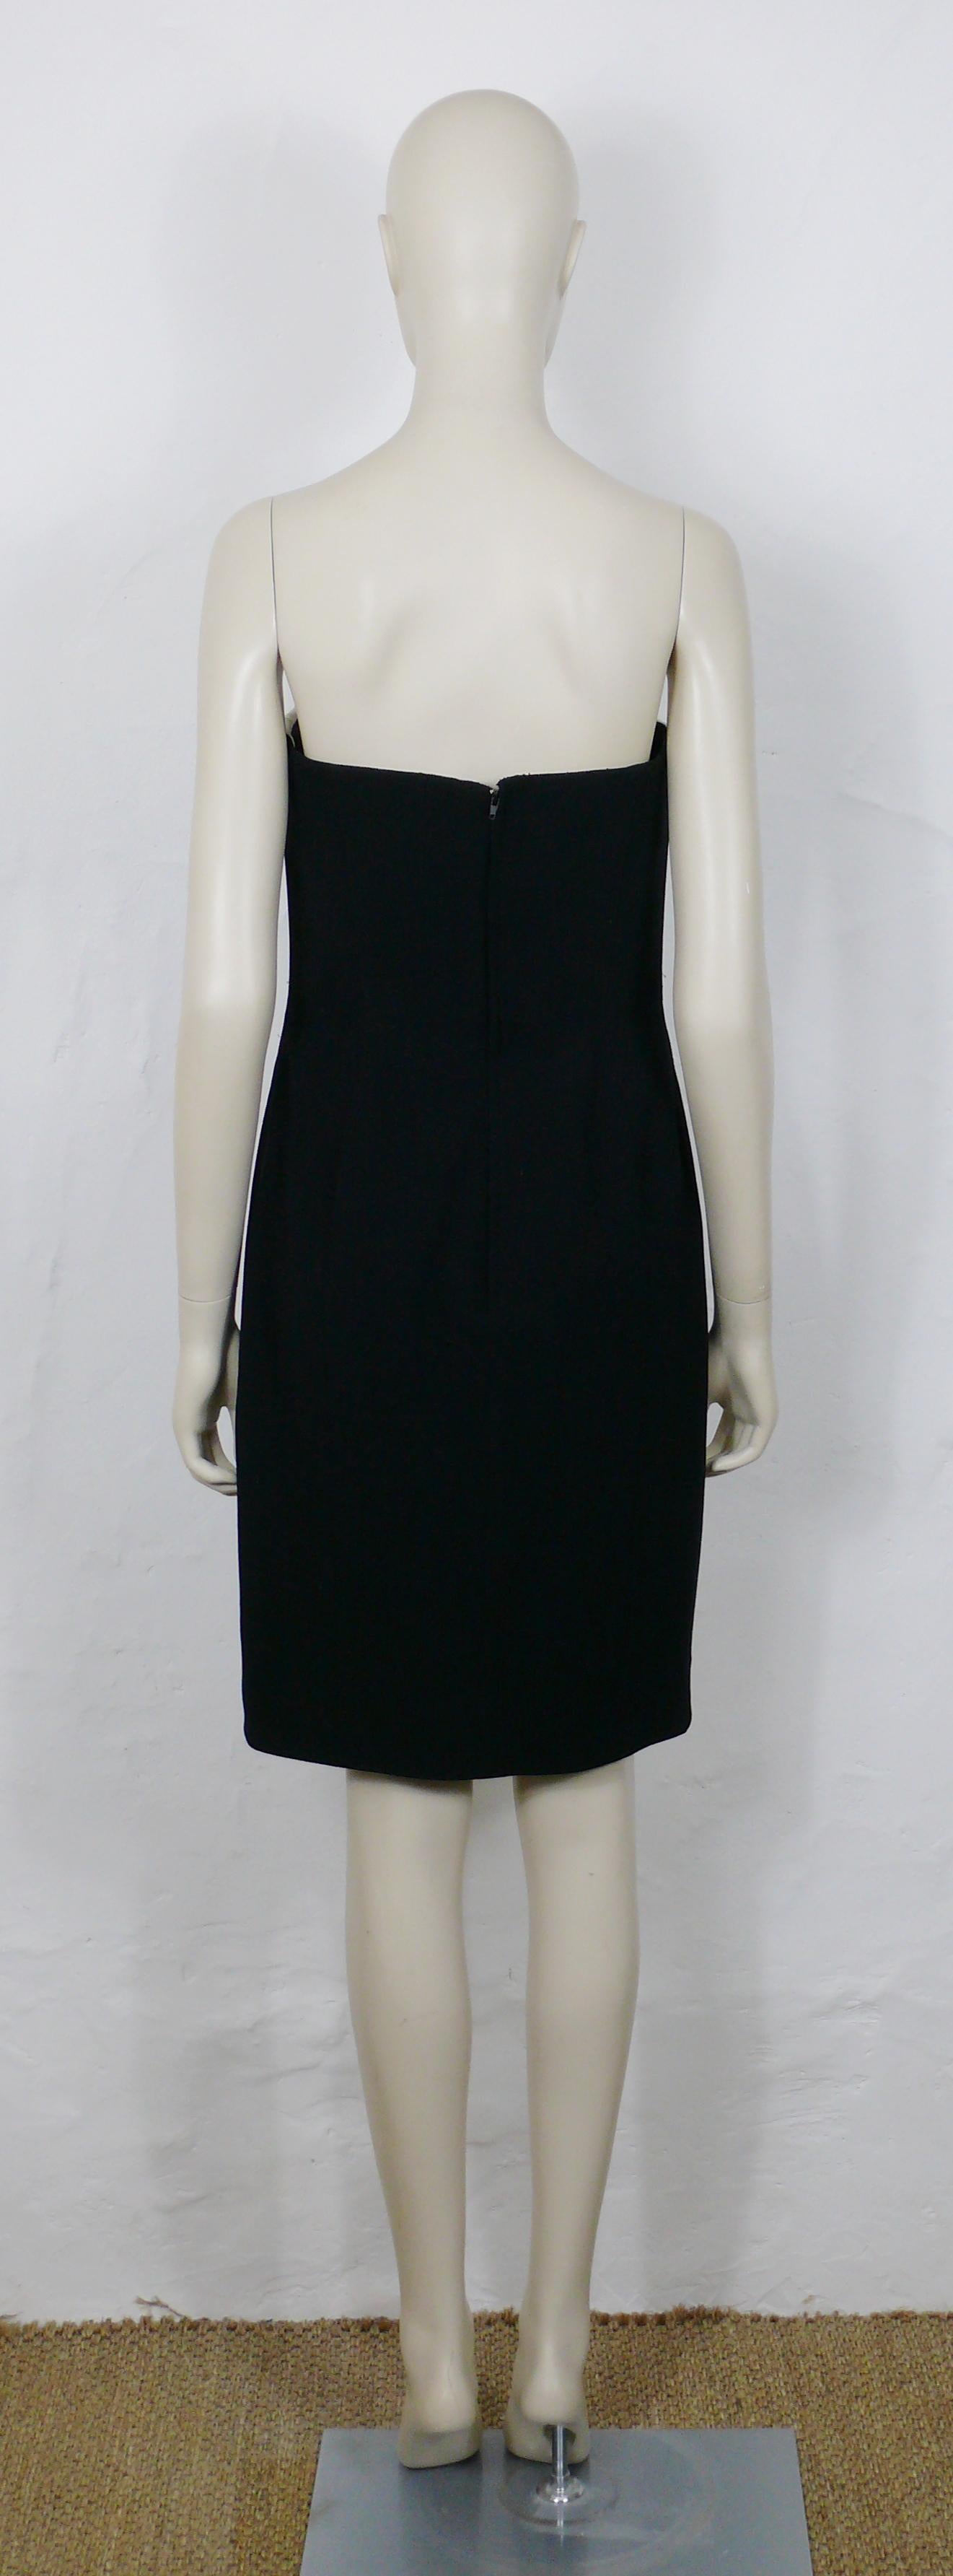 Gray Thierry Mugler Vintage Black and White Asymetric Bustier Dress For Sale